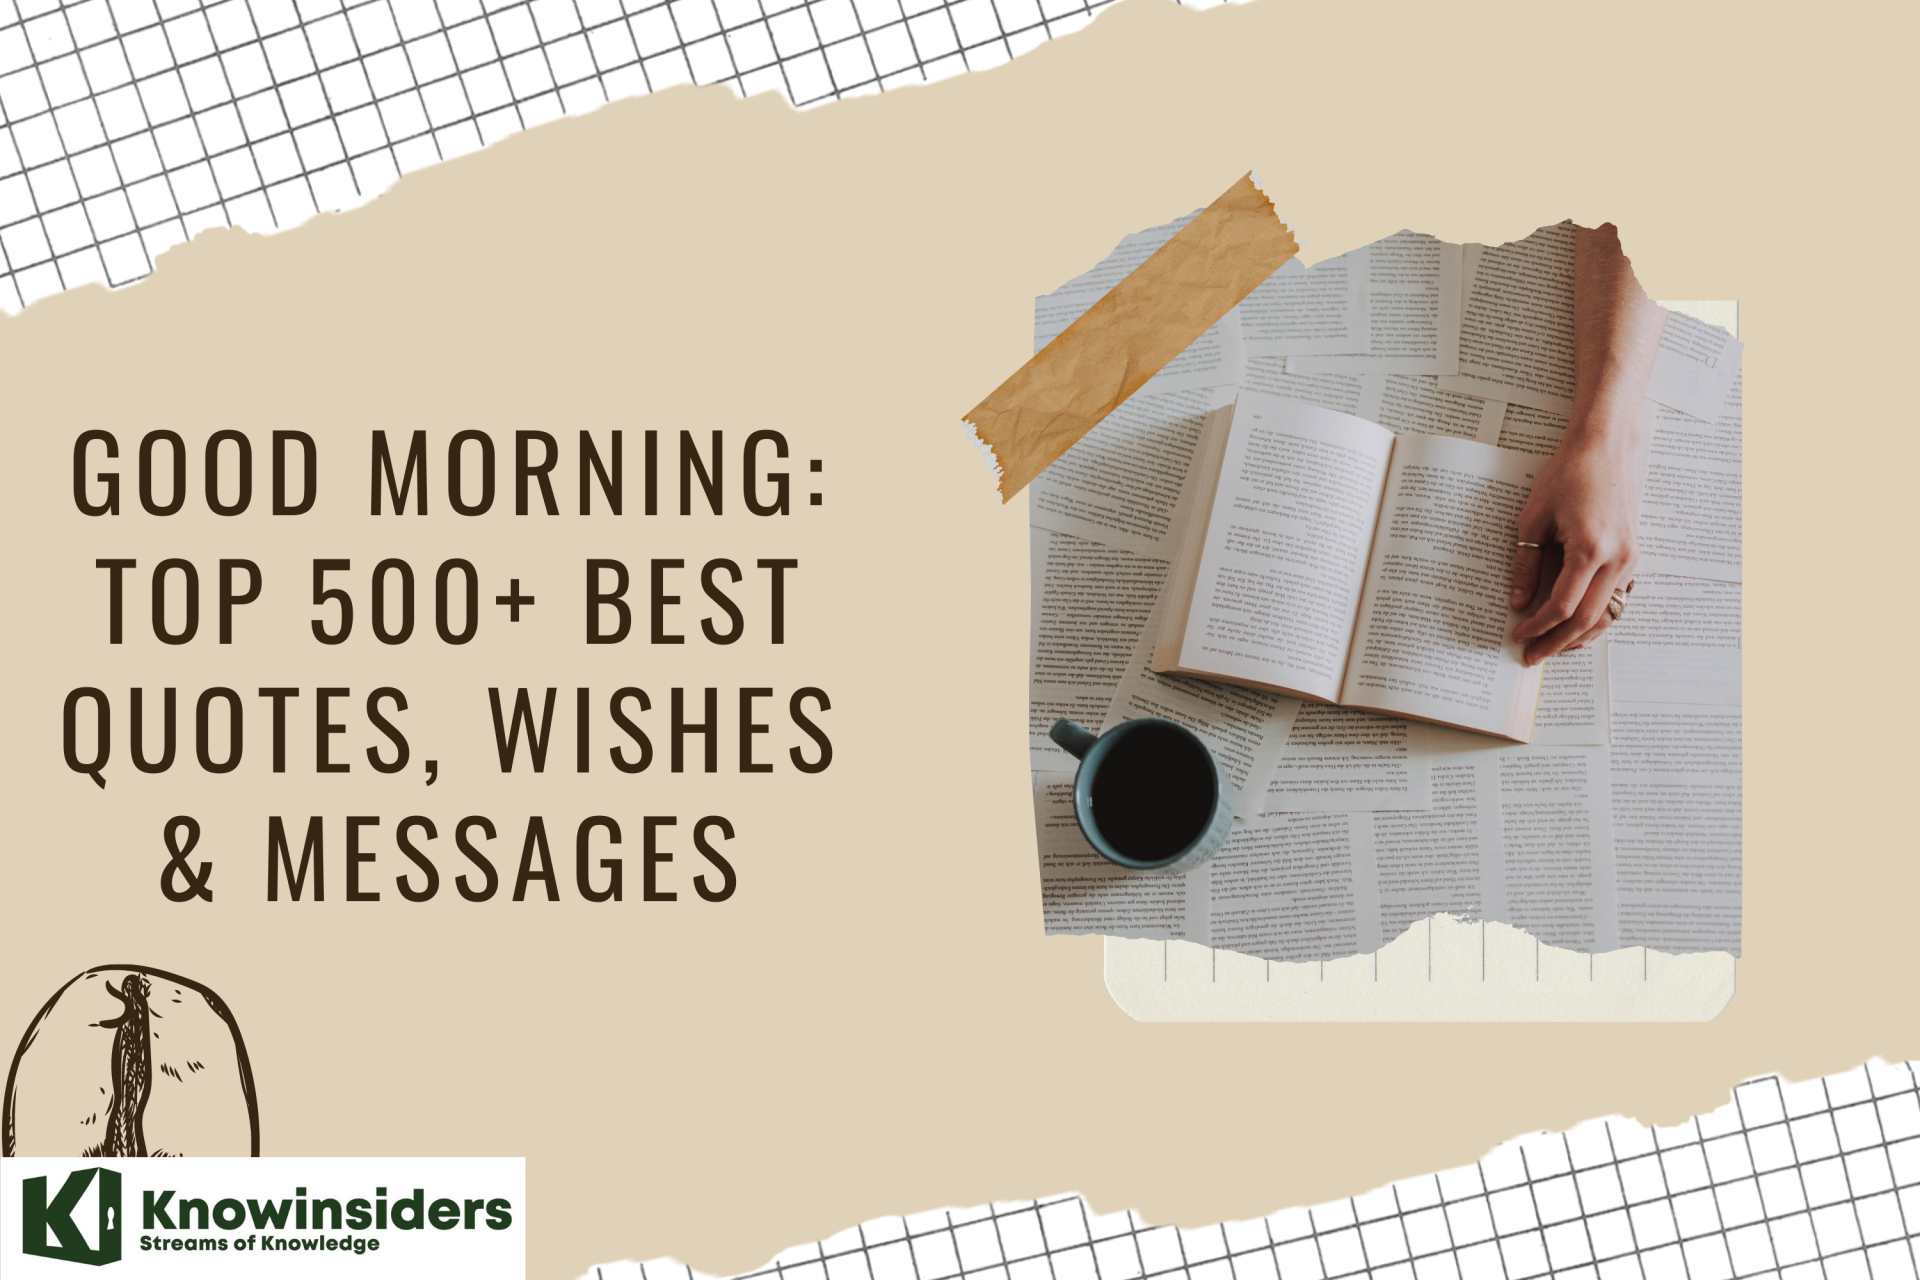 Good Morning: Top 500+ Best Quotes, Wishes & Messages to Brighten New Day